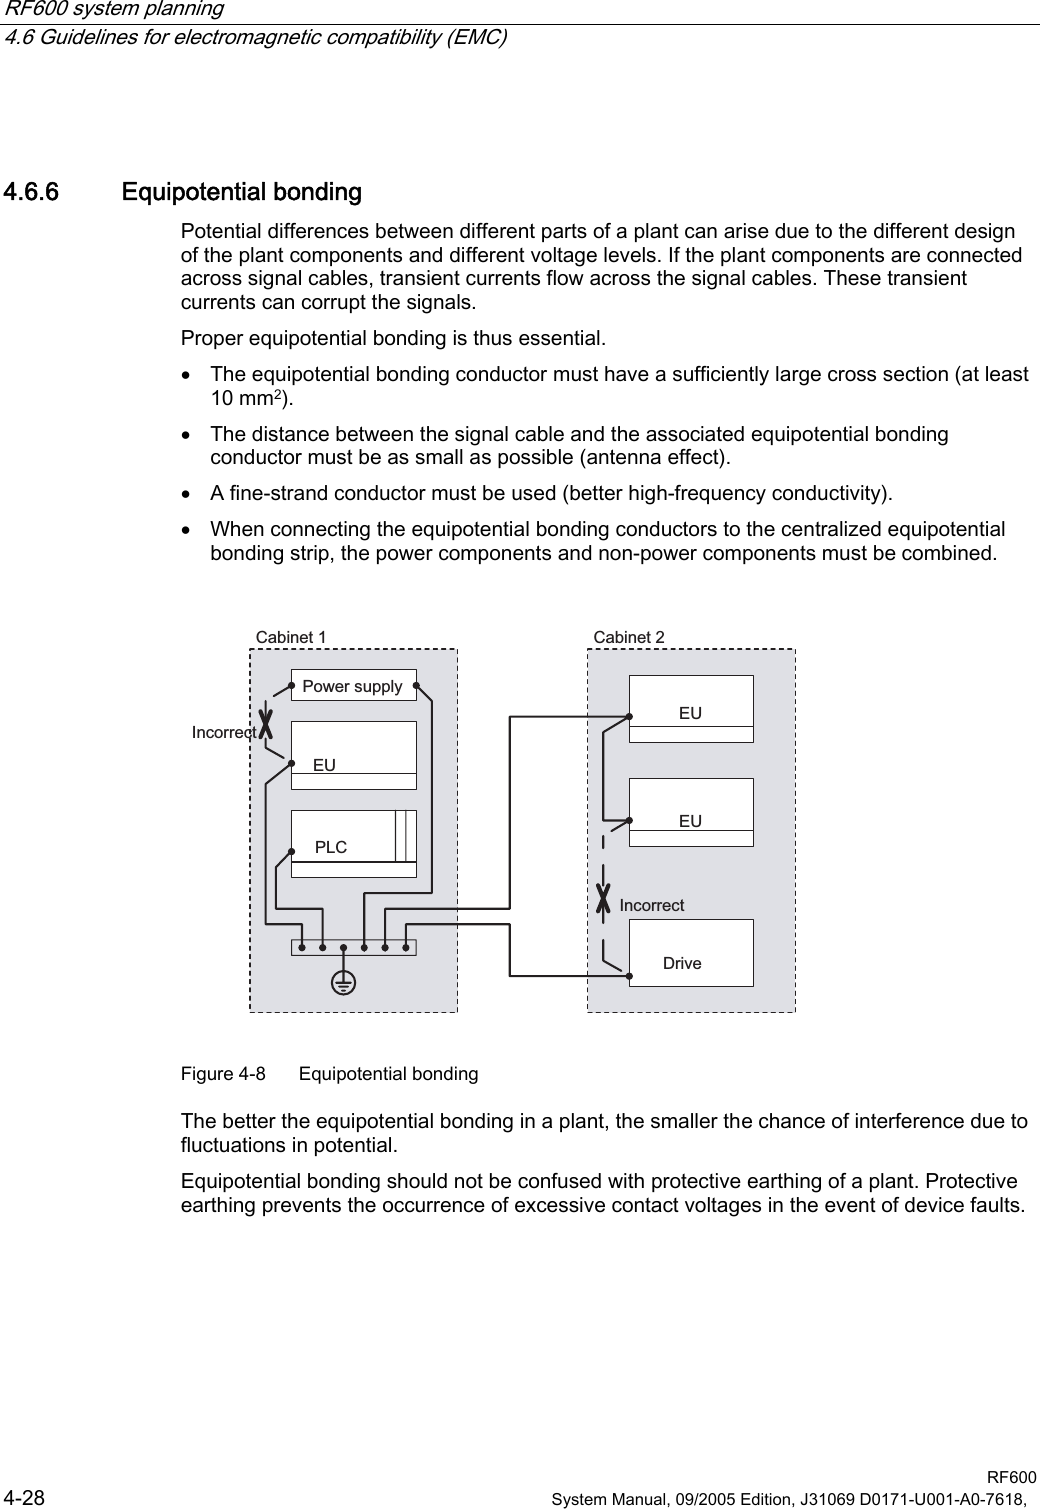 RF600 system planning   4.6 Guidelines for electromagnetic compatibility (EMC)  RF600 4-28  System Manual, 09/2005 Edition, J31069 D0171-U001-A0-7618,   4.6.6 Equipotential bonding Potential differences between different parts of a plant can arise due to the different design of the plant components and different voltage levels. If the plant components are connected across signal cables, transient currents flow across the signal cables. These transient currents can corrupt the signals. Proper equipotential bonding is thus essential.  • The equipotential bonding conductor must have a sufficiently large cross section (at least 10 mm2). • The distance between the signal cable and the associated equipotential bonding conductor must be as small as possible (antenna effect). • A fine-strand conductor must be used (better high-frequency conductivity). • When connecting the equipotential bonding conductors to the centralized equipotential bonding strip, the power components and non-power components must be combined.  3RZHUVXSSO\3/&amp;(8(8(8&apos;ULYH,QFRUUHFW,QFRUUHFW&amp;DELQHW &amp;DELQHW Figure 4-8  Equipotential bonding The better the equipotential bonding in a plant, the smaller the chance of interference due to fluctuations in potential. Equipotential bonding should not be confused with protective earthing of a plant. Protective earthing prevents the occurrence of excessive contact voltages in the event of device faults. 